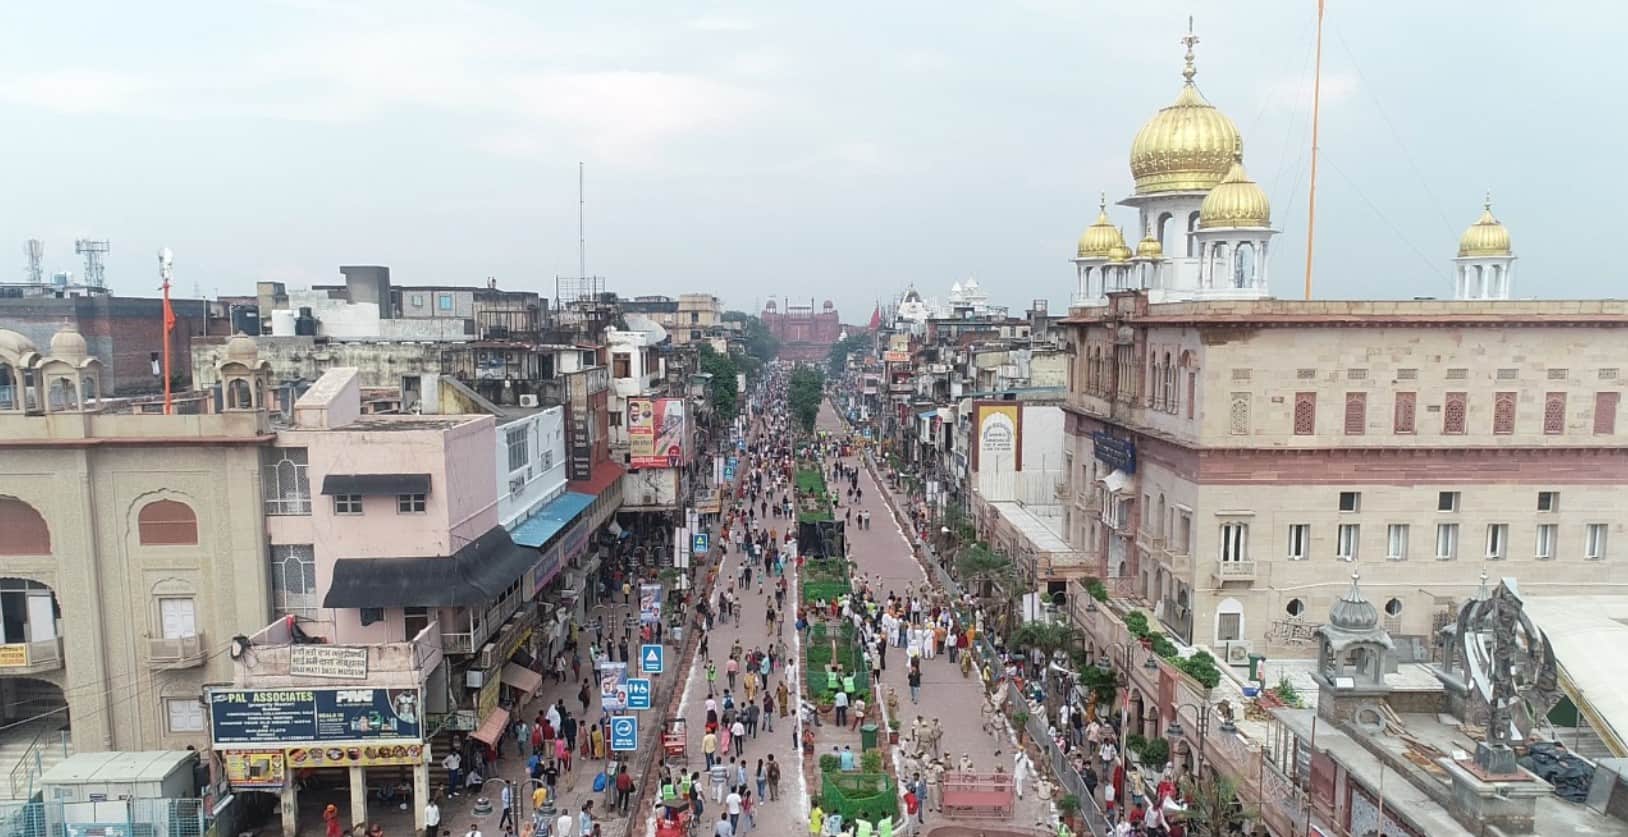 Redeveloped Chandni Chowk market area